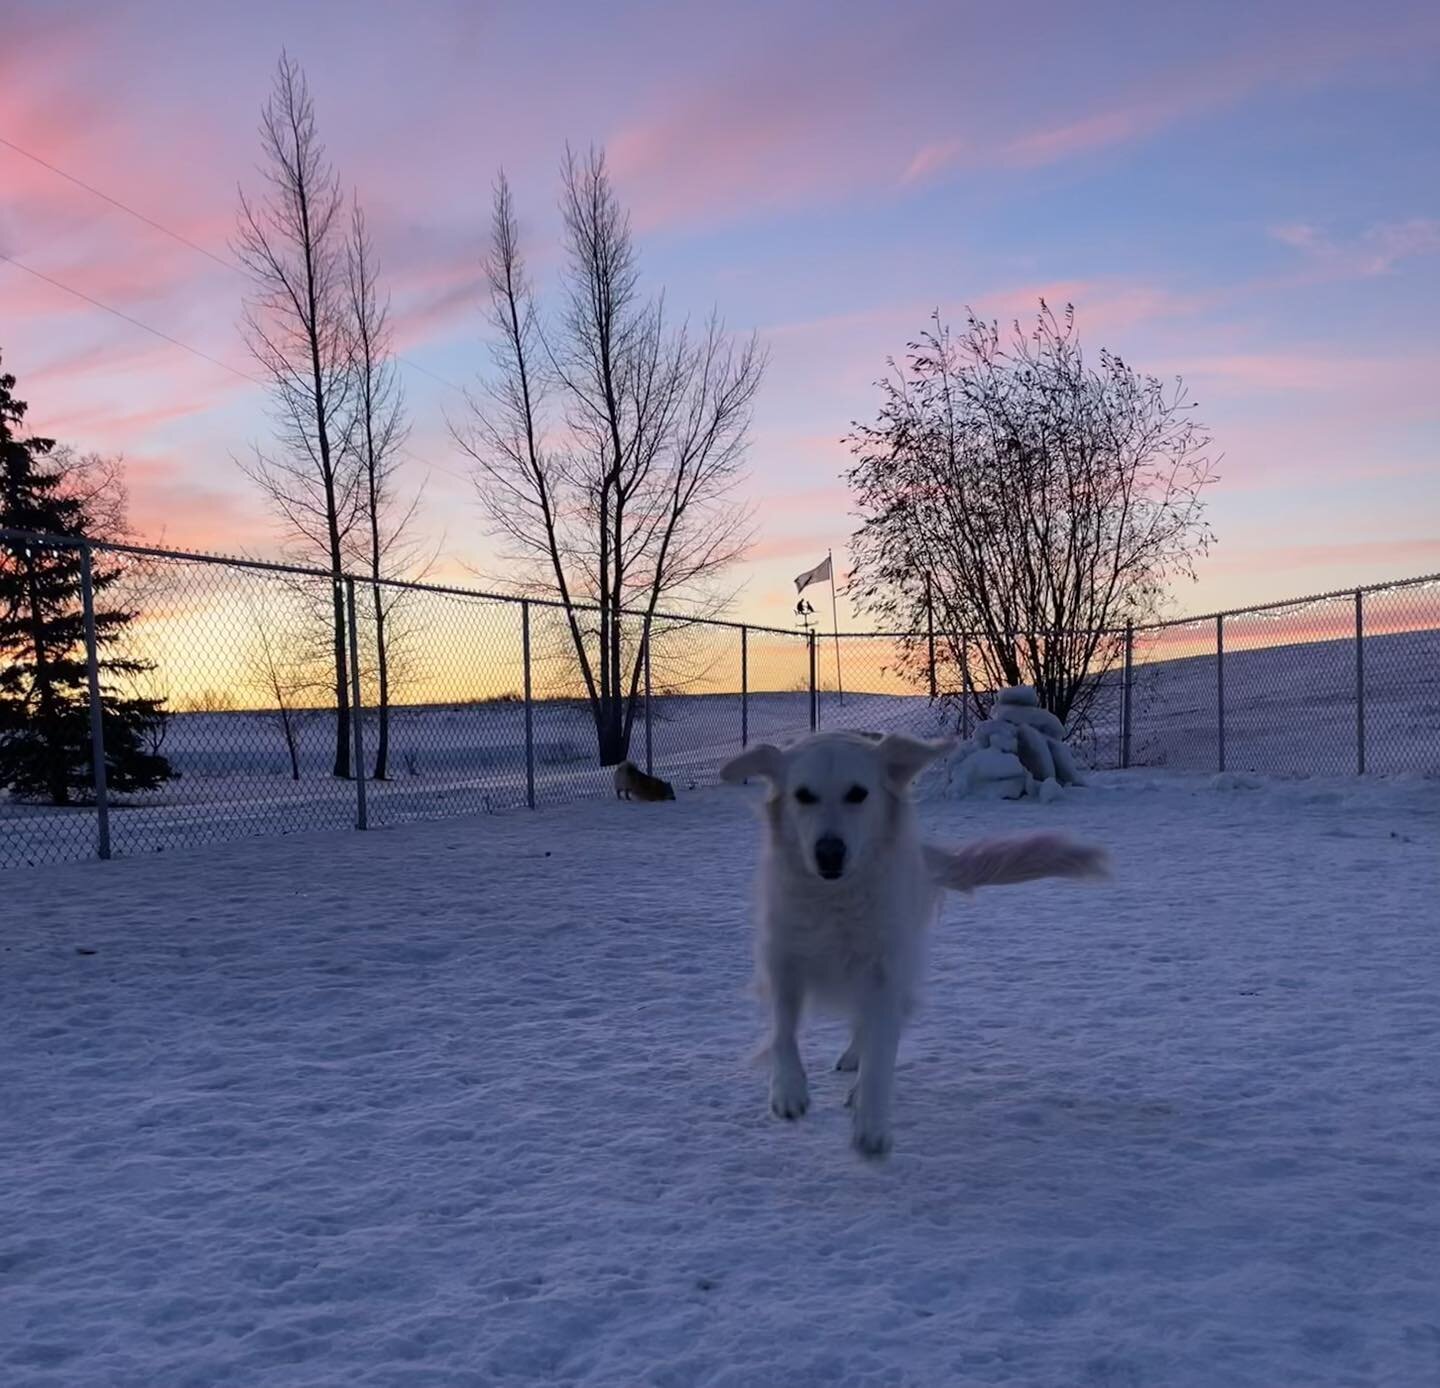 We&rsquo;ve had some beautiful skies the last few days. So, we thought &hellip;..&rdquo;how cool, the sky is so pink it&rsquo;s making Luna&rsquo;s tail look pink&rdquo; only to realize her tail actually is pink! 😆 How cute is that? 
#beautifuldogs 